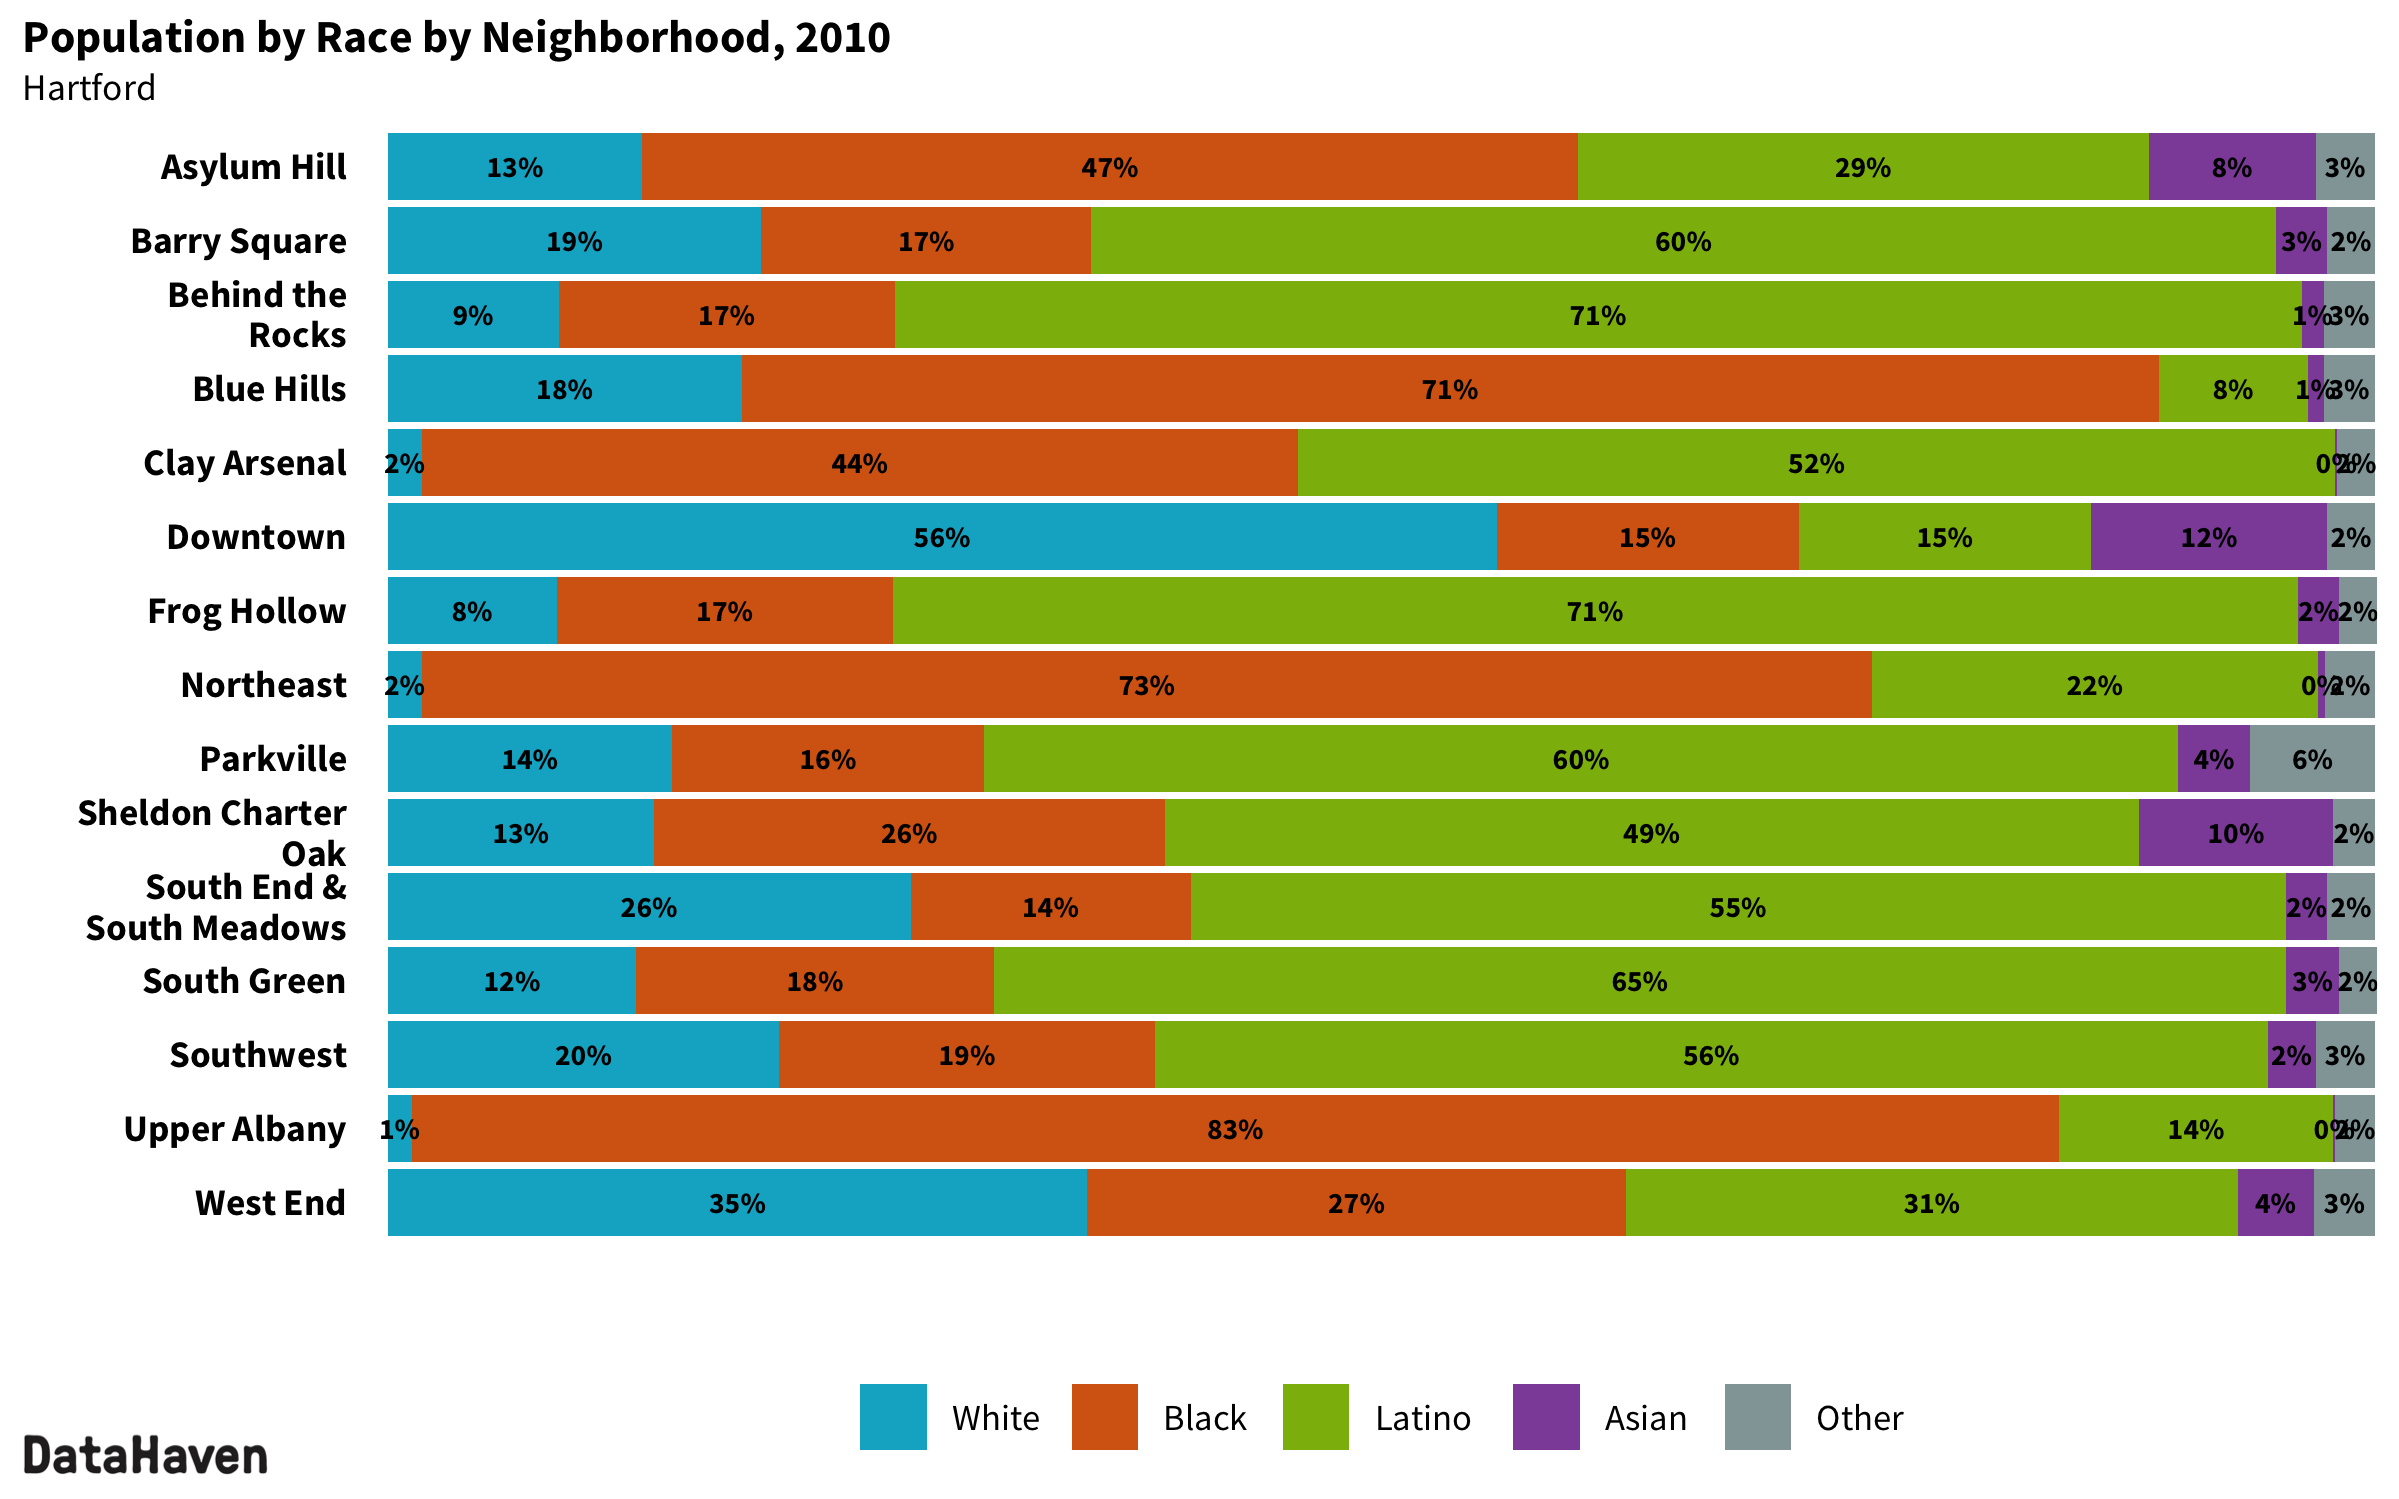 Hartford Connecticut 2010 Census neighborhood composition by race ethnicity